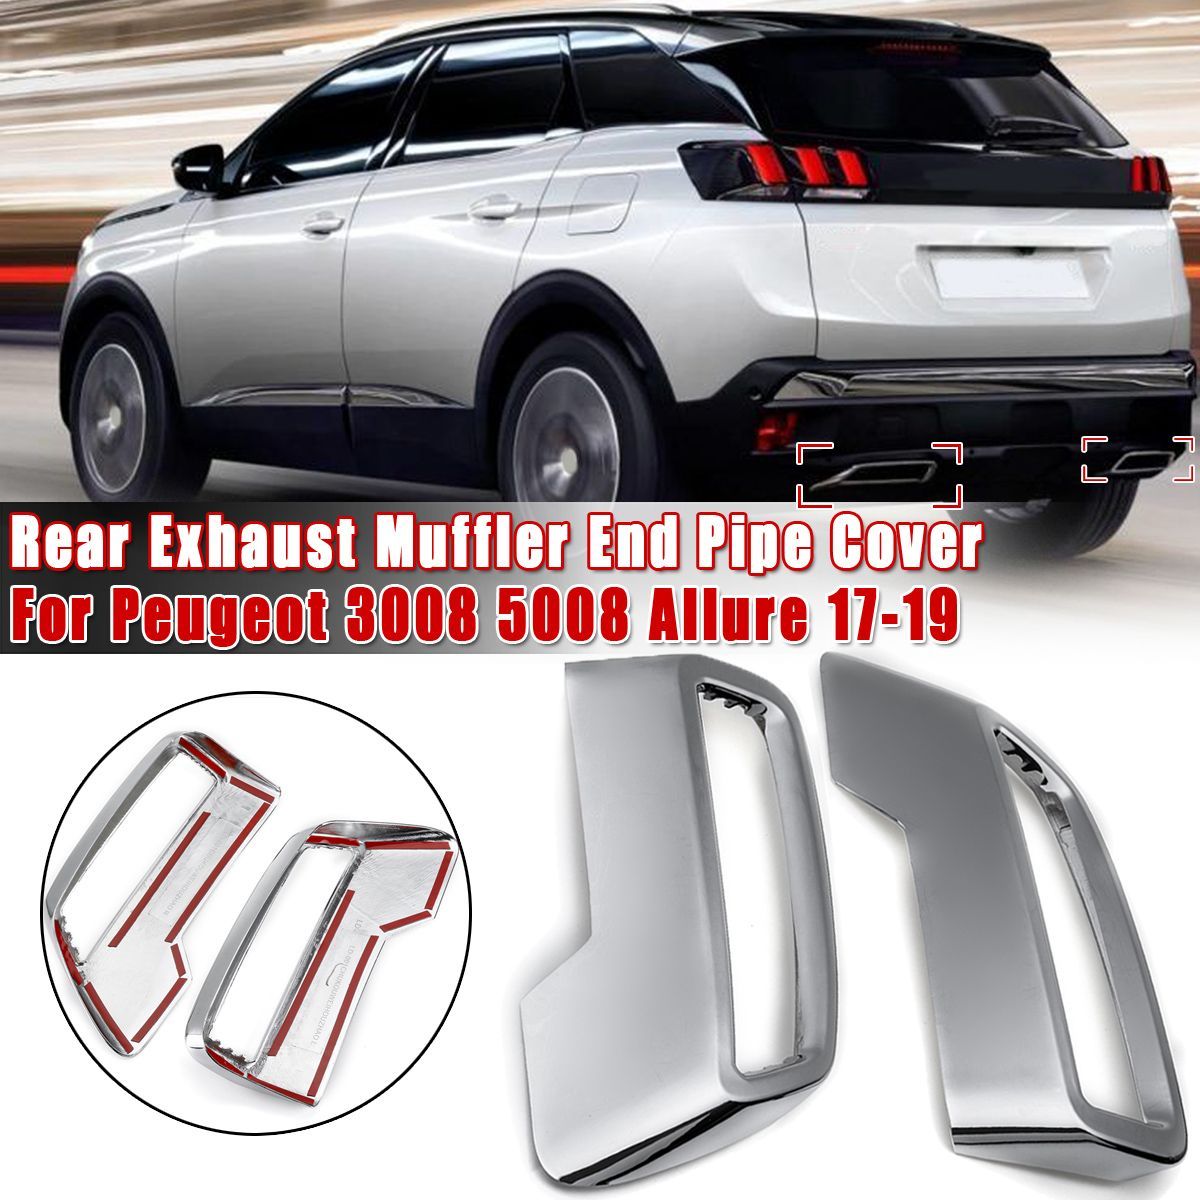 2Pcs-Car-Rear-Exhaust-Muffler-End-Pipe-Cover-For-Peugeot-3008-5008-Allure-2017-2019-1673129